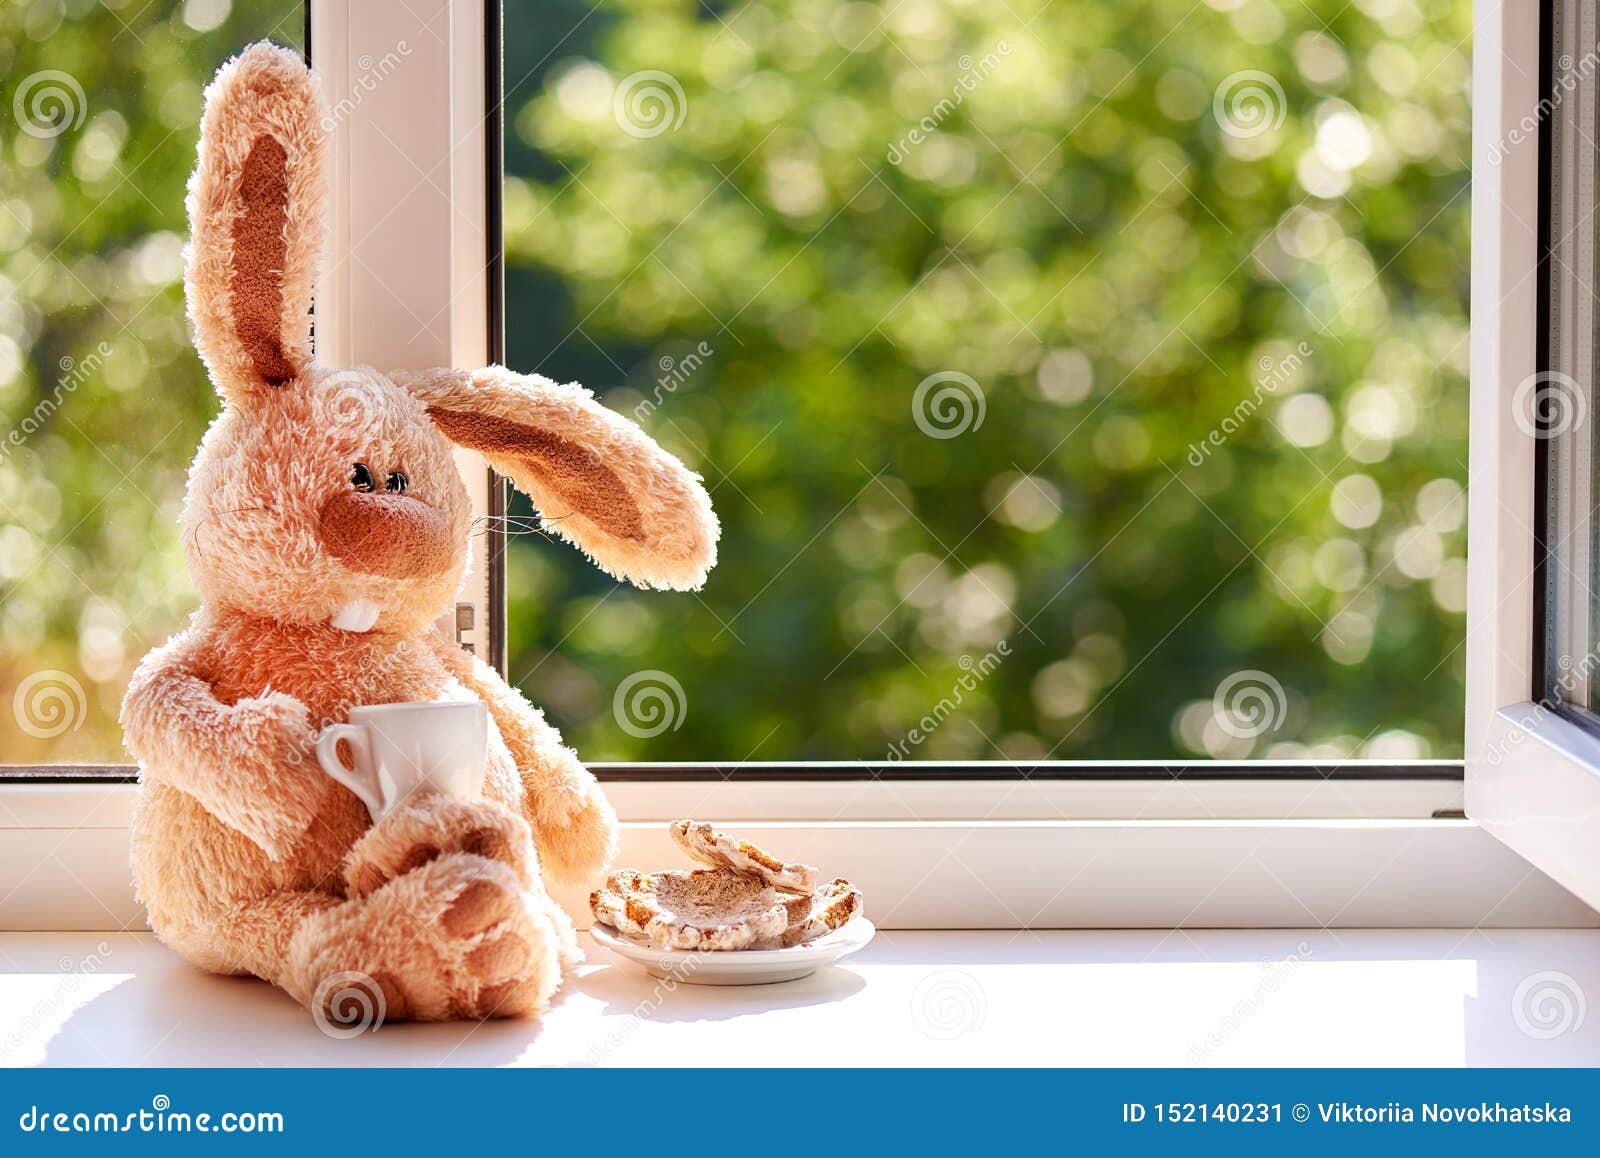 Rabbit With A Cup Of Coffee And Biscuits In The Morning Near The Open ... Open Window At Morning